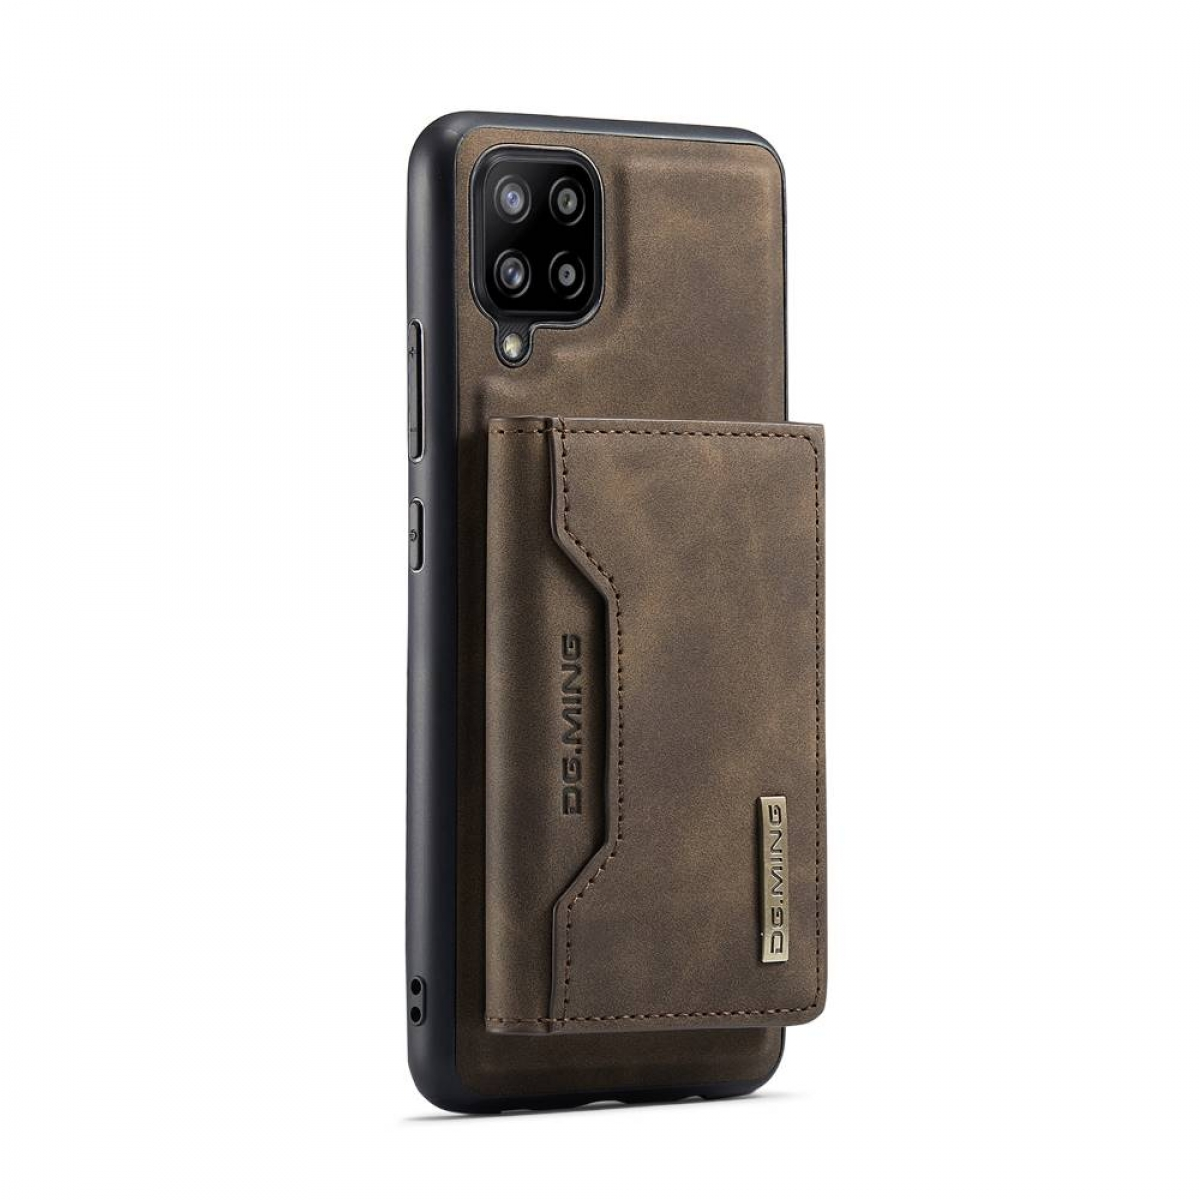 DG MING M2 2in1, Galaxy A42, Backcover, Coffee Samsung